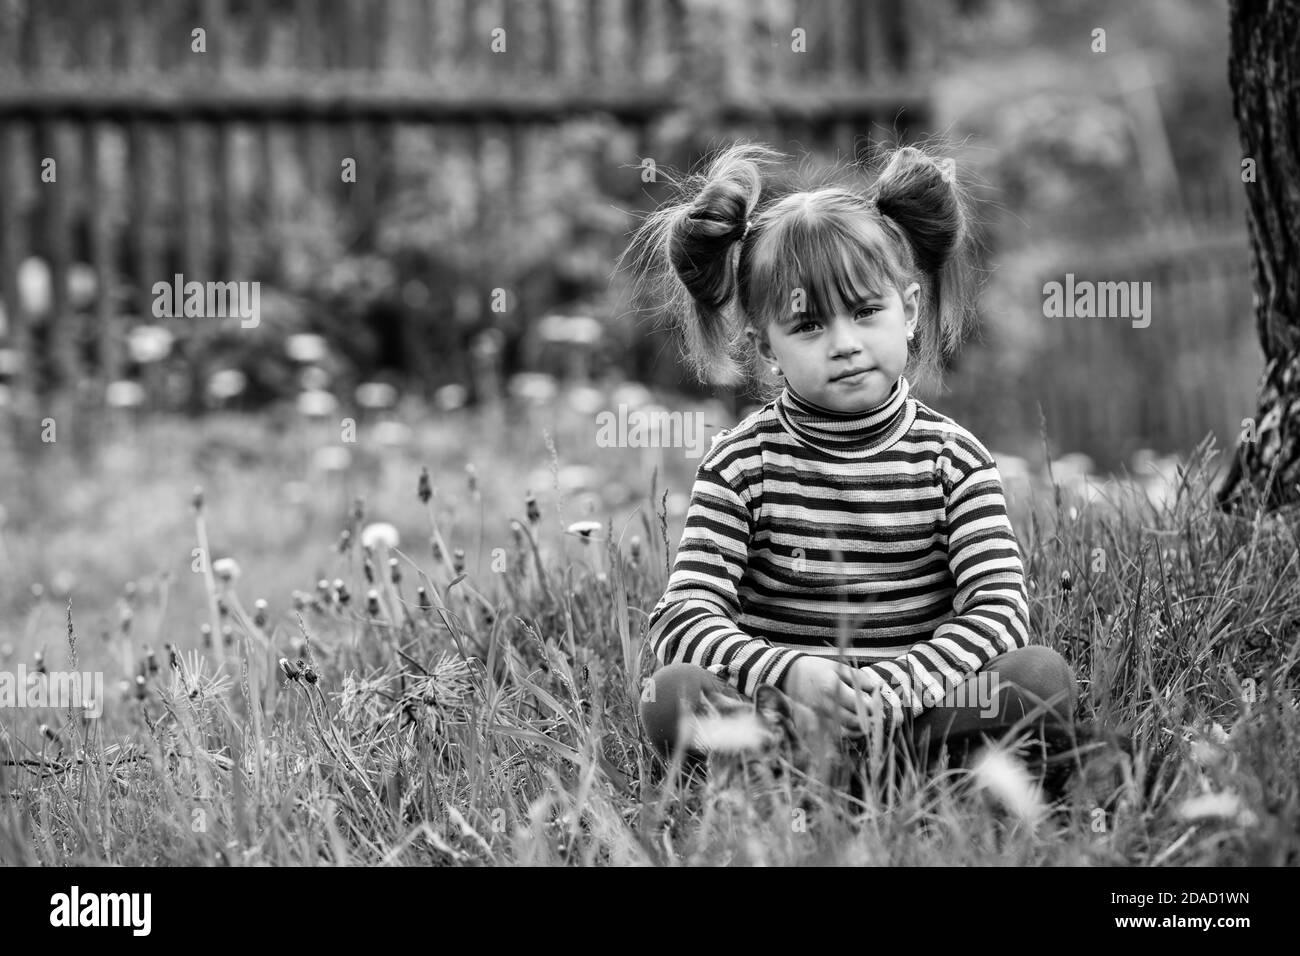 Lovely little girl playing in the park. Black and white photography. Stock Photo